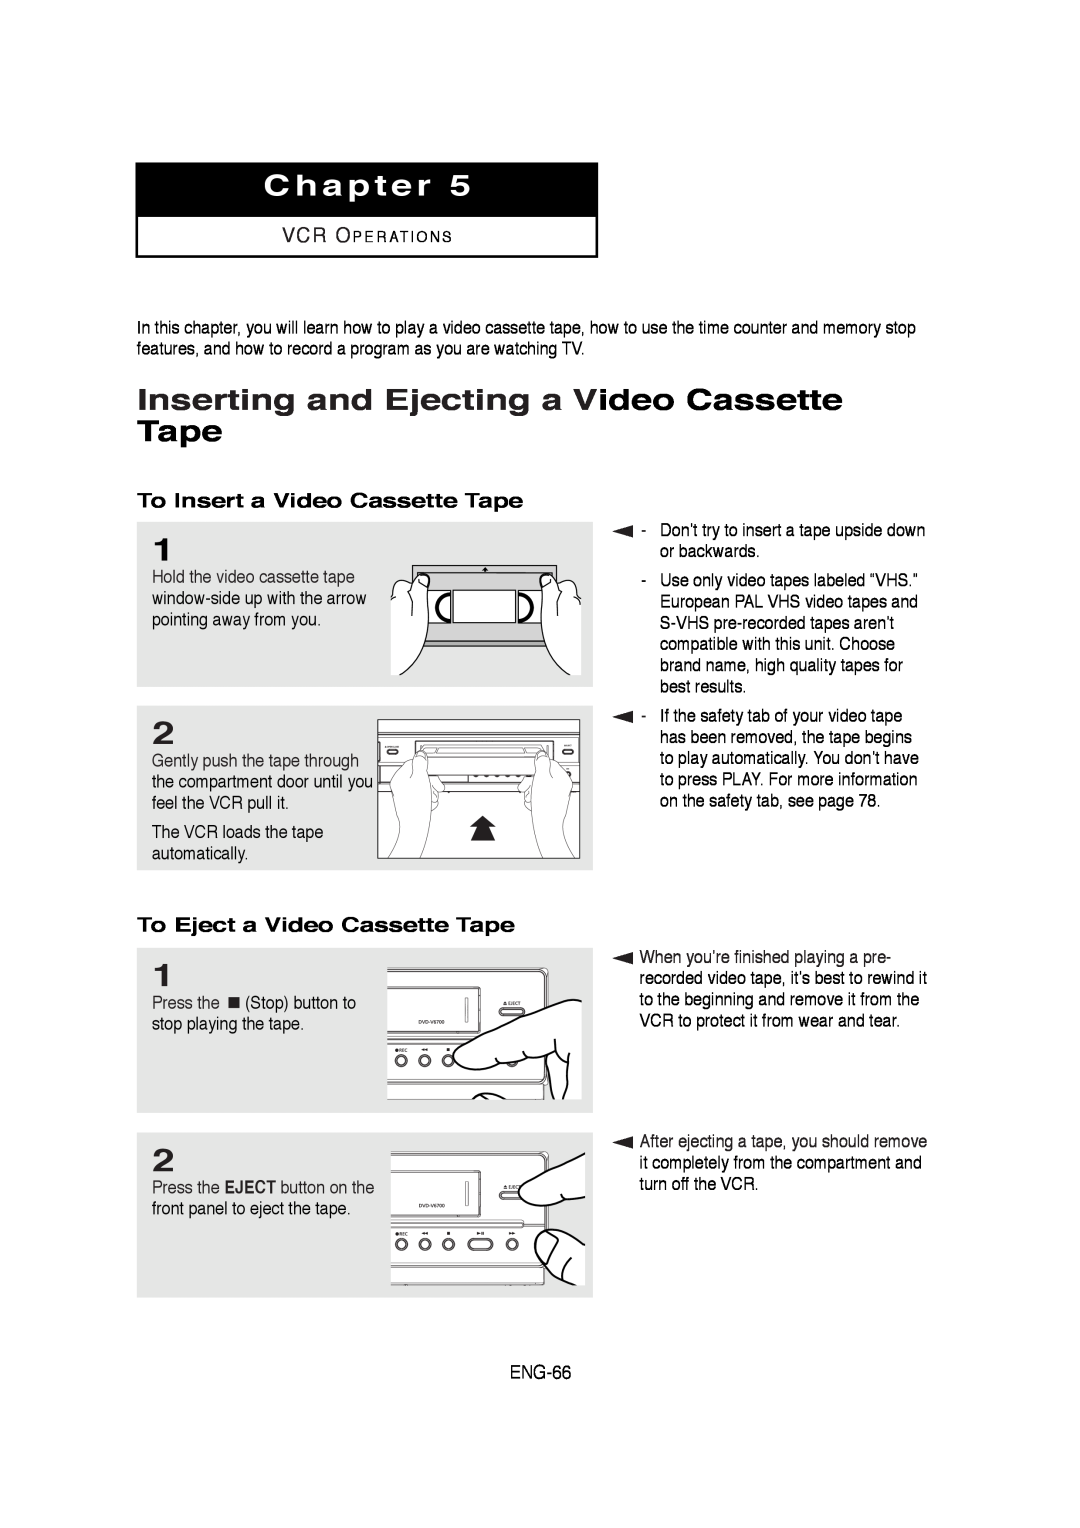 Samsung 01304A, V6700-XAC Inserting and Ejecting a Video Cassette Tape, To Insert a Video Cassette Tape, Chapter 